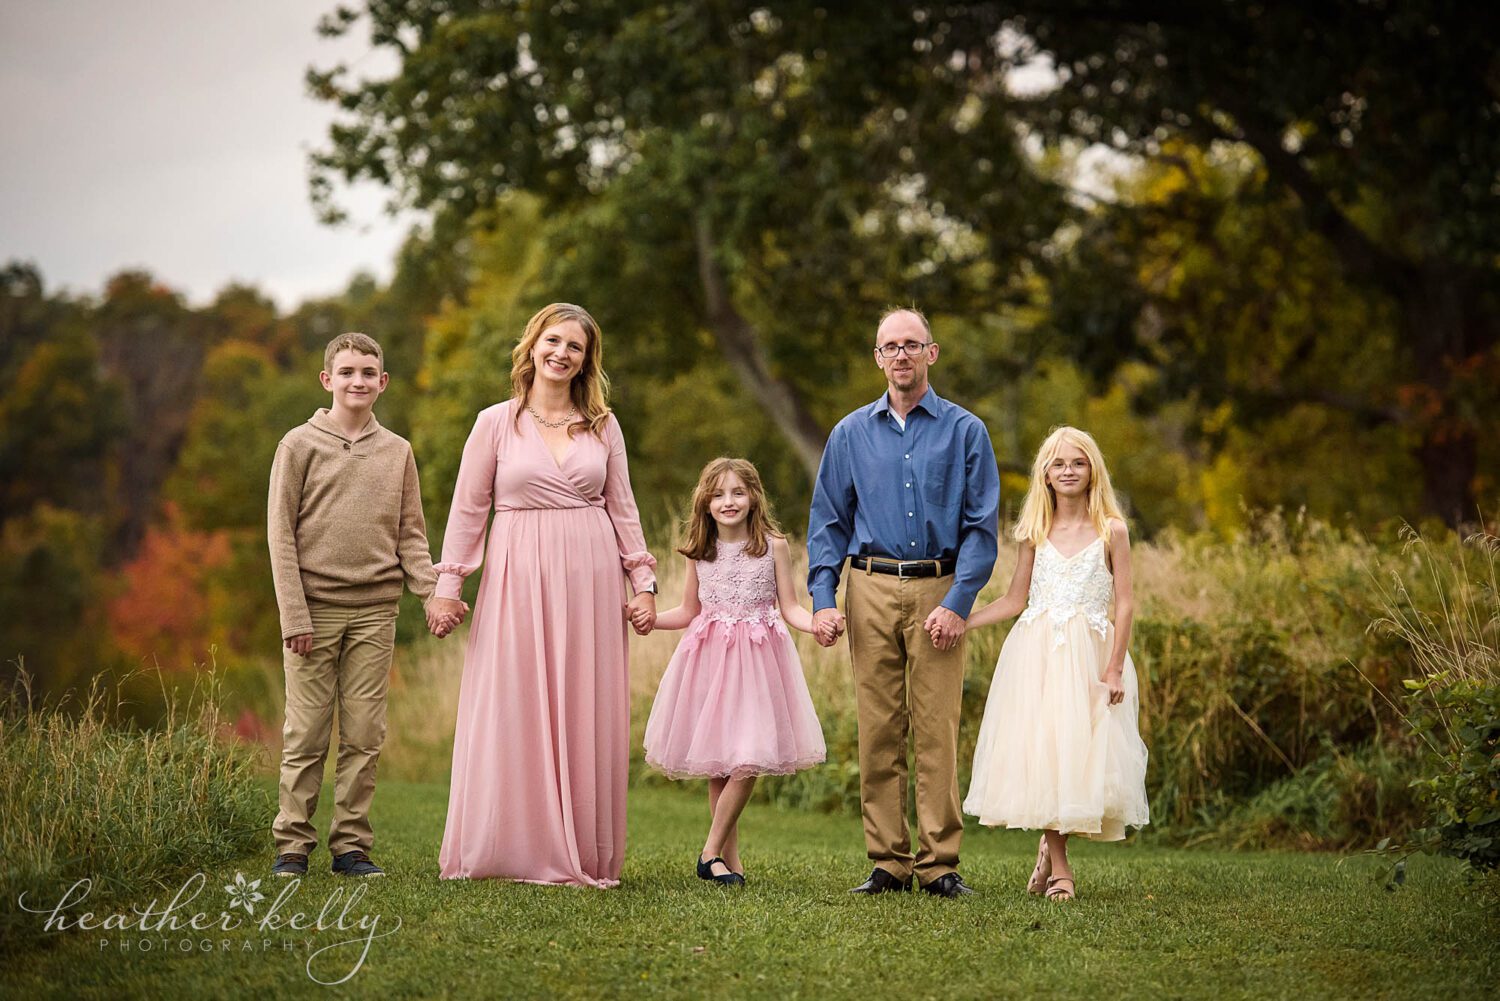 newtown area family photography. Family of 5 all holding hands and looking at the camera. 